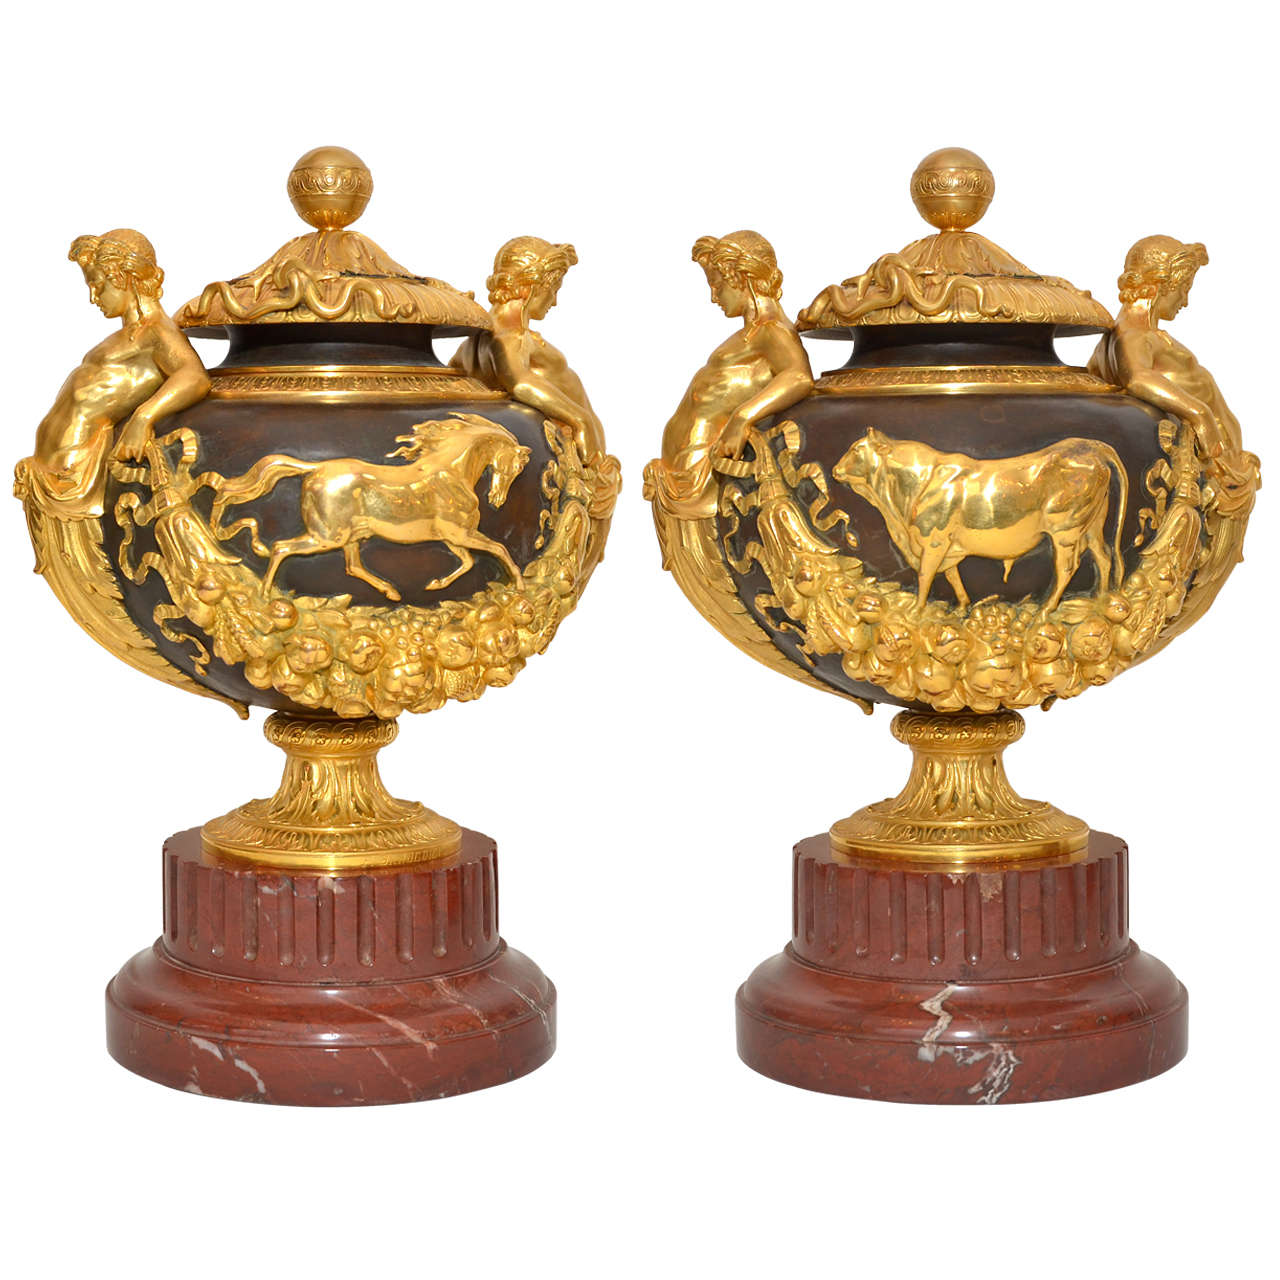 Rare Pair of Neoclassical Vases by Barbedienne For Sale